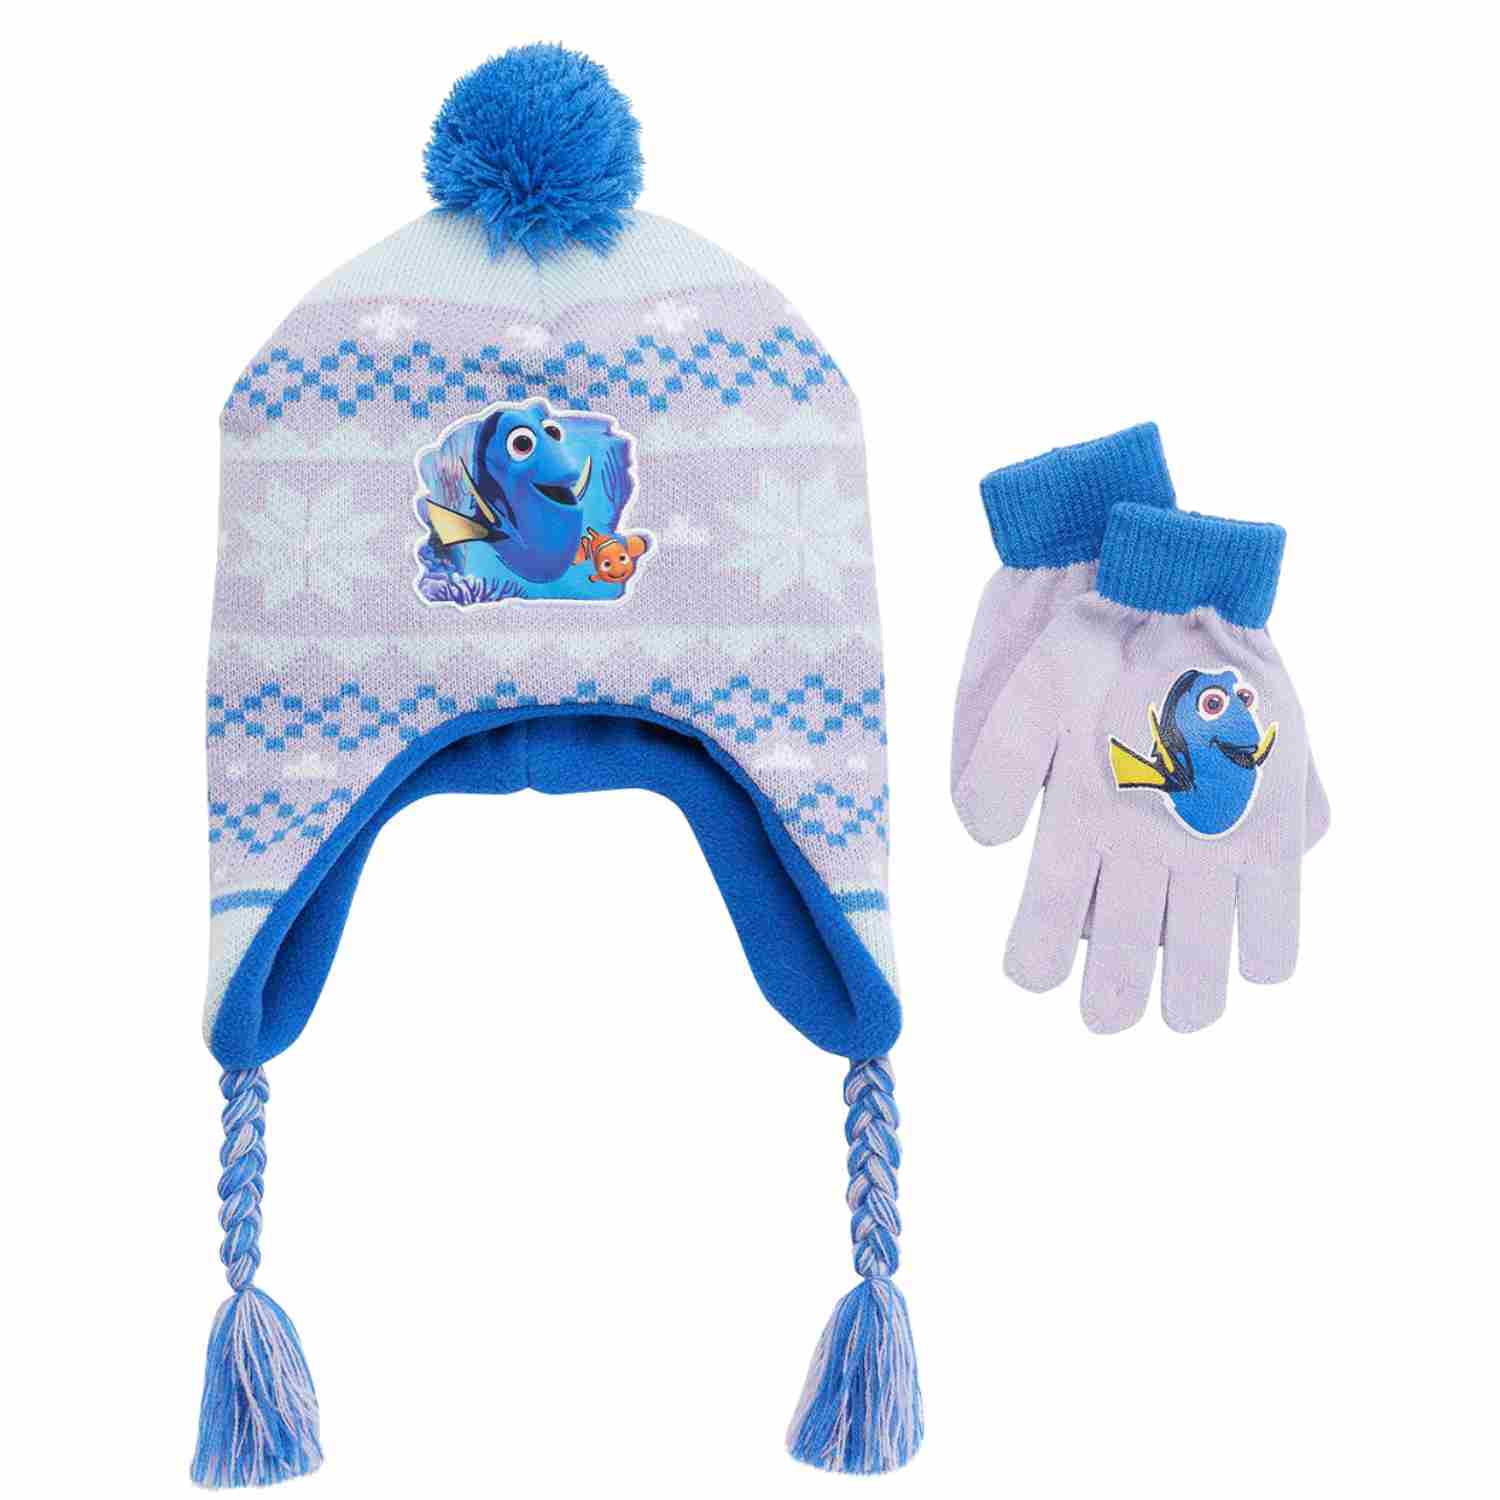 Girls Finding Dory Hat Gloves And Scarf 3PC Set One Size 2 to 8 Years 780-516 